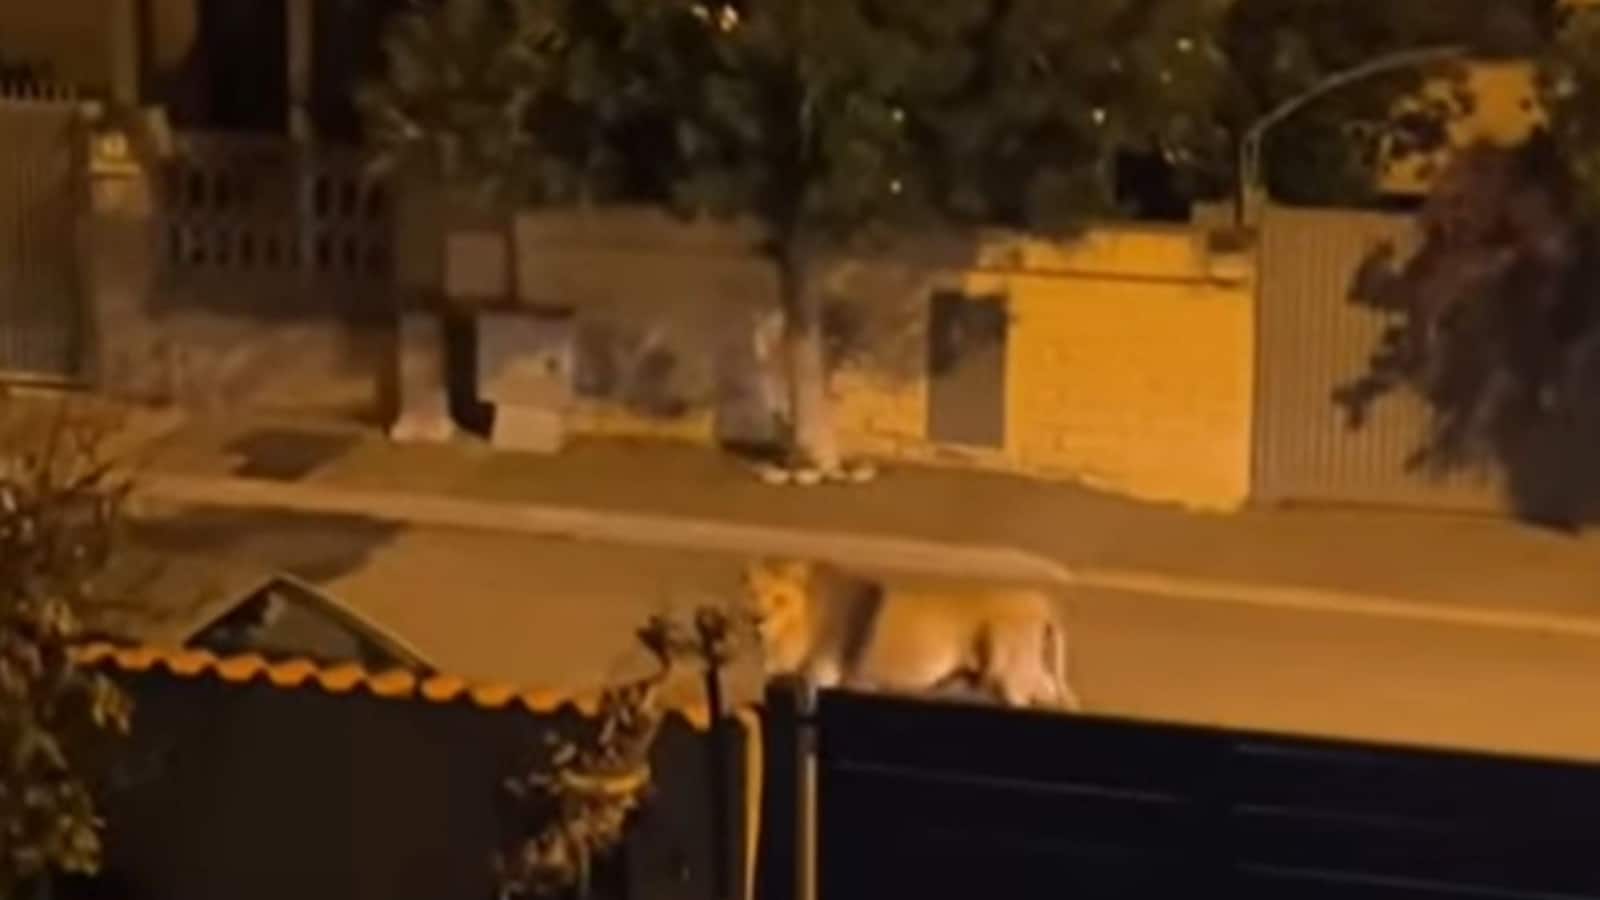 Circus lion roams freely through Italian streets in viral video. Watch